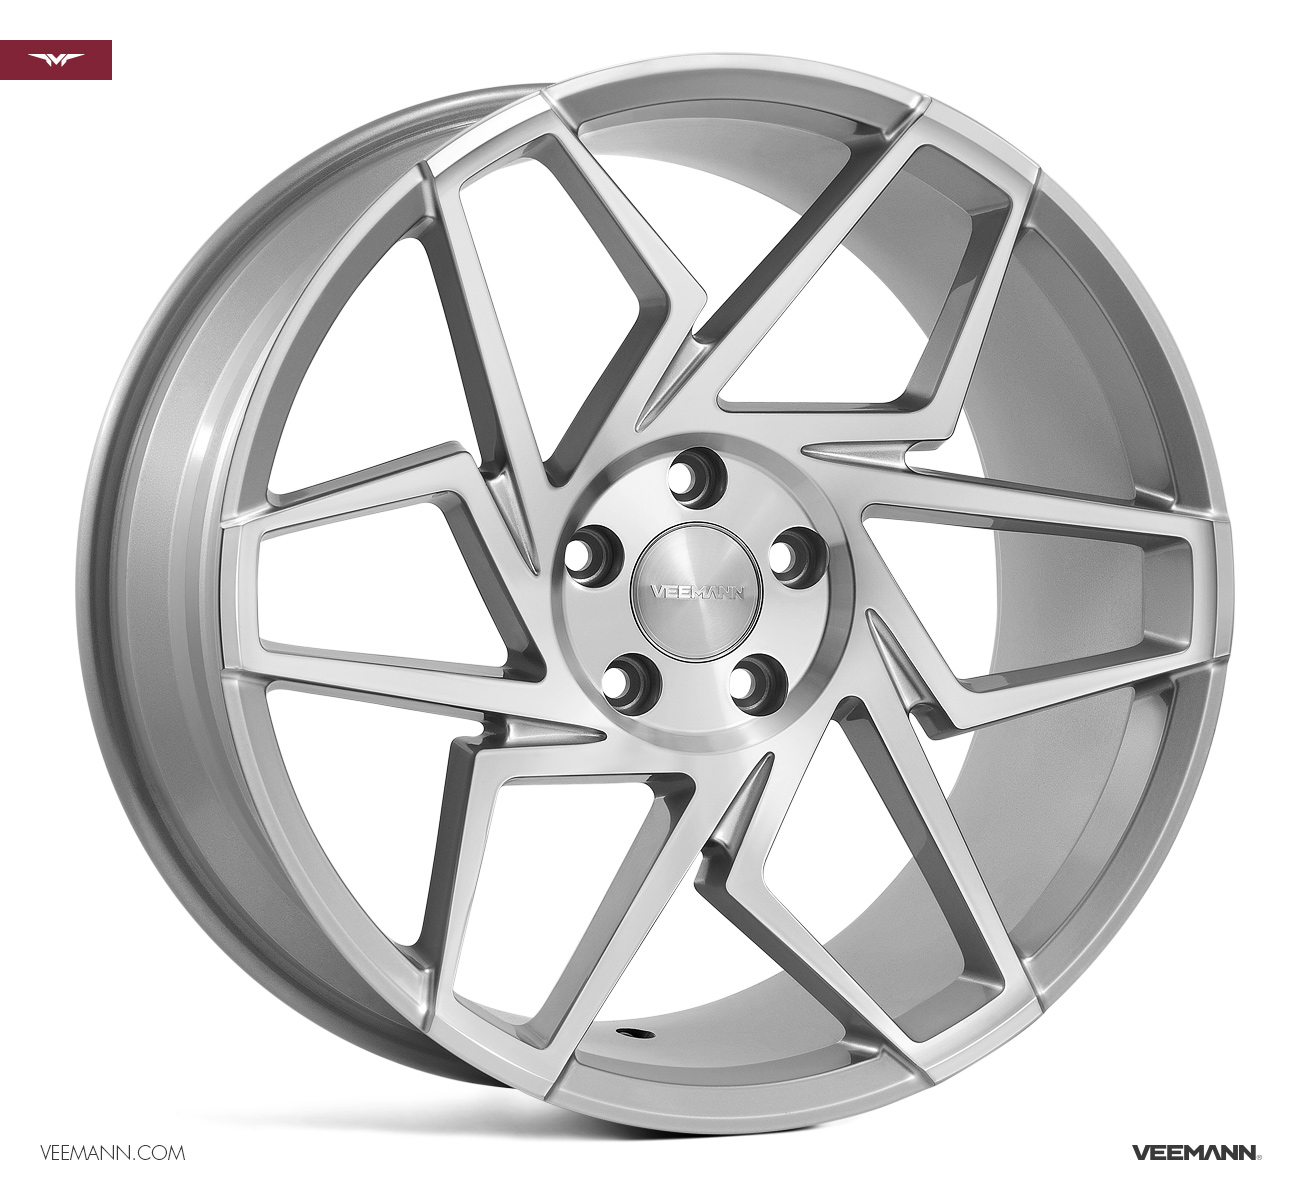 NEW 19  VEEMANN V FS27R ALLOY WHEELS IN SILVER POL WITH WIDER 9 5  REARS et42 40 42